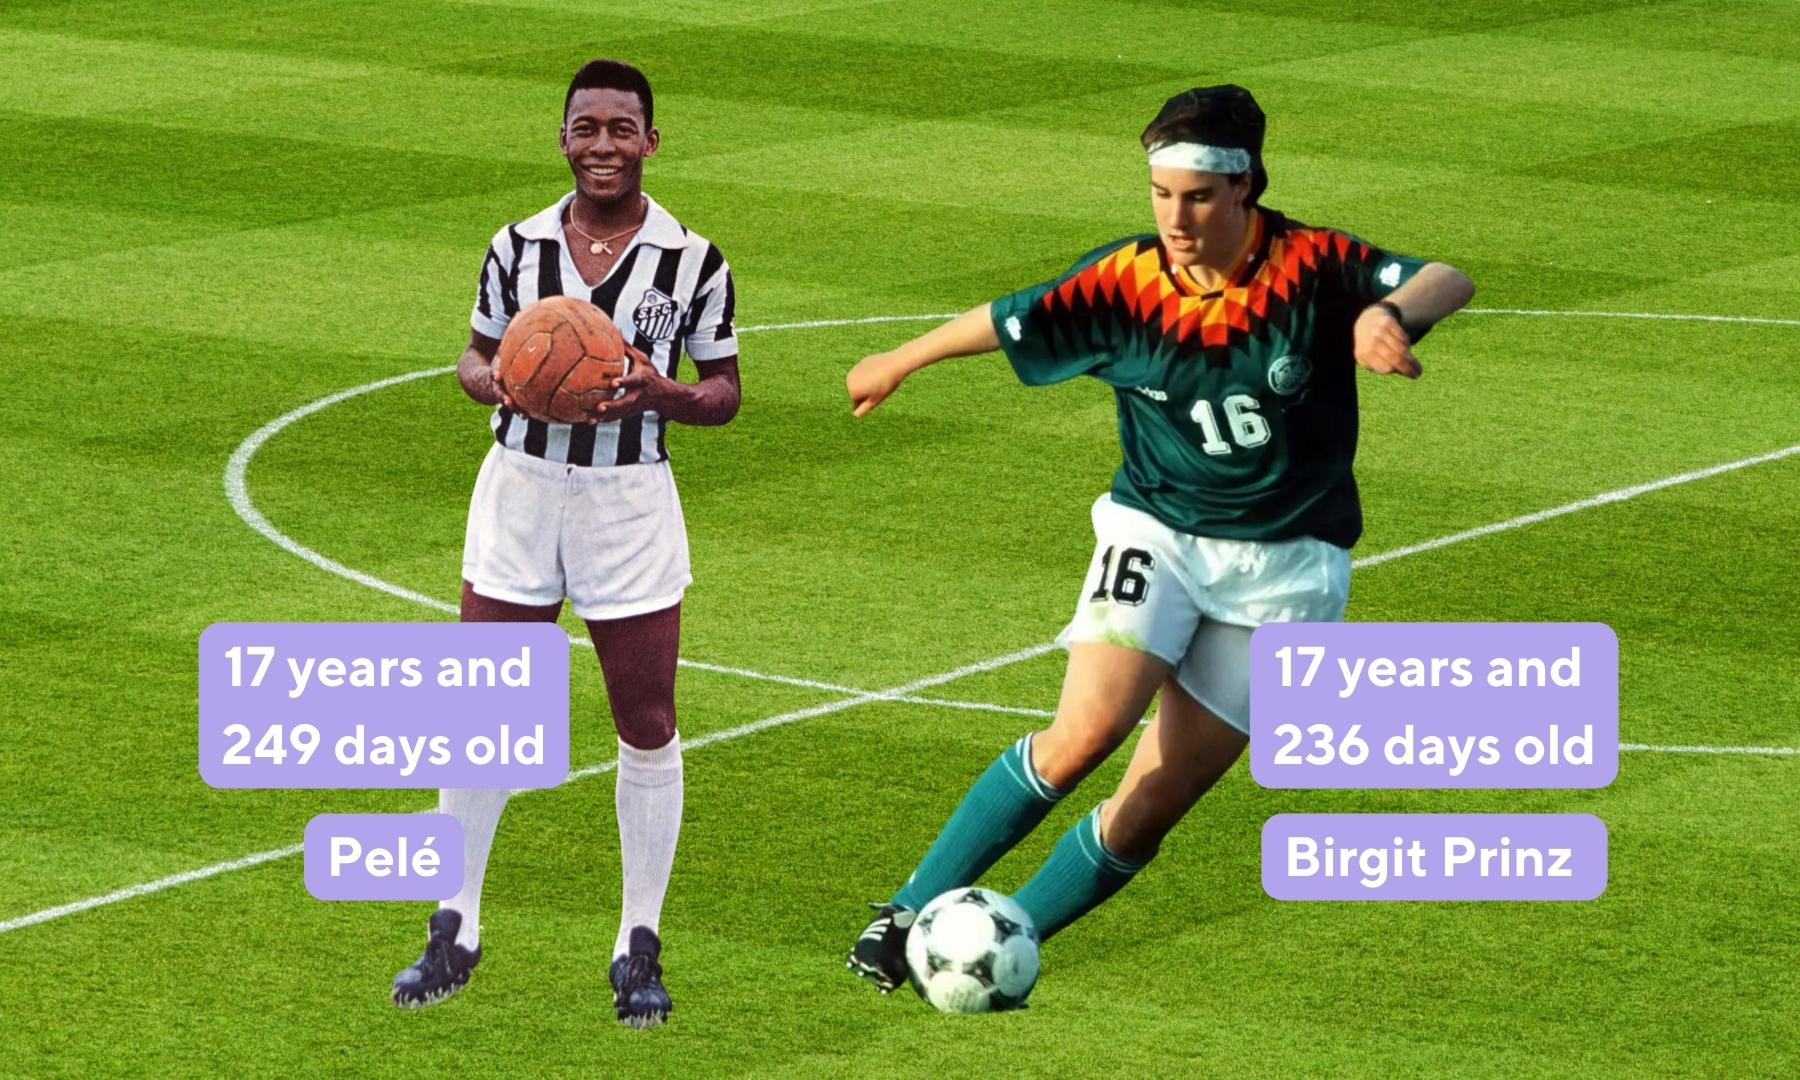 Soccer statistics of youngest player in a World Cup final include Pelé and Birgit Prinz